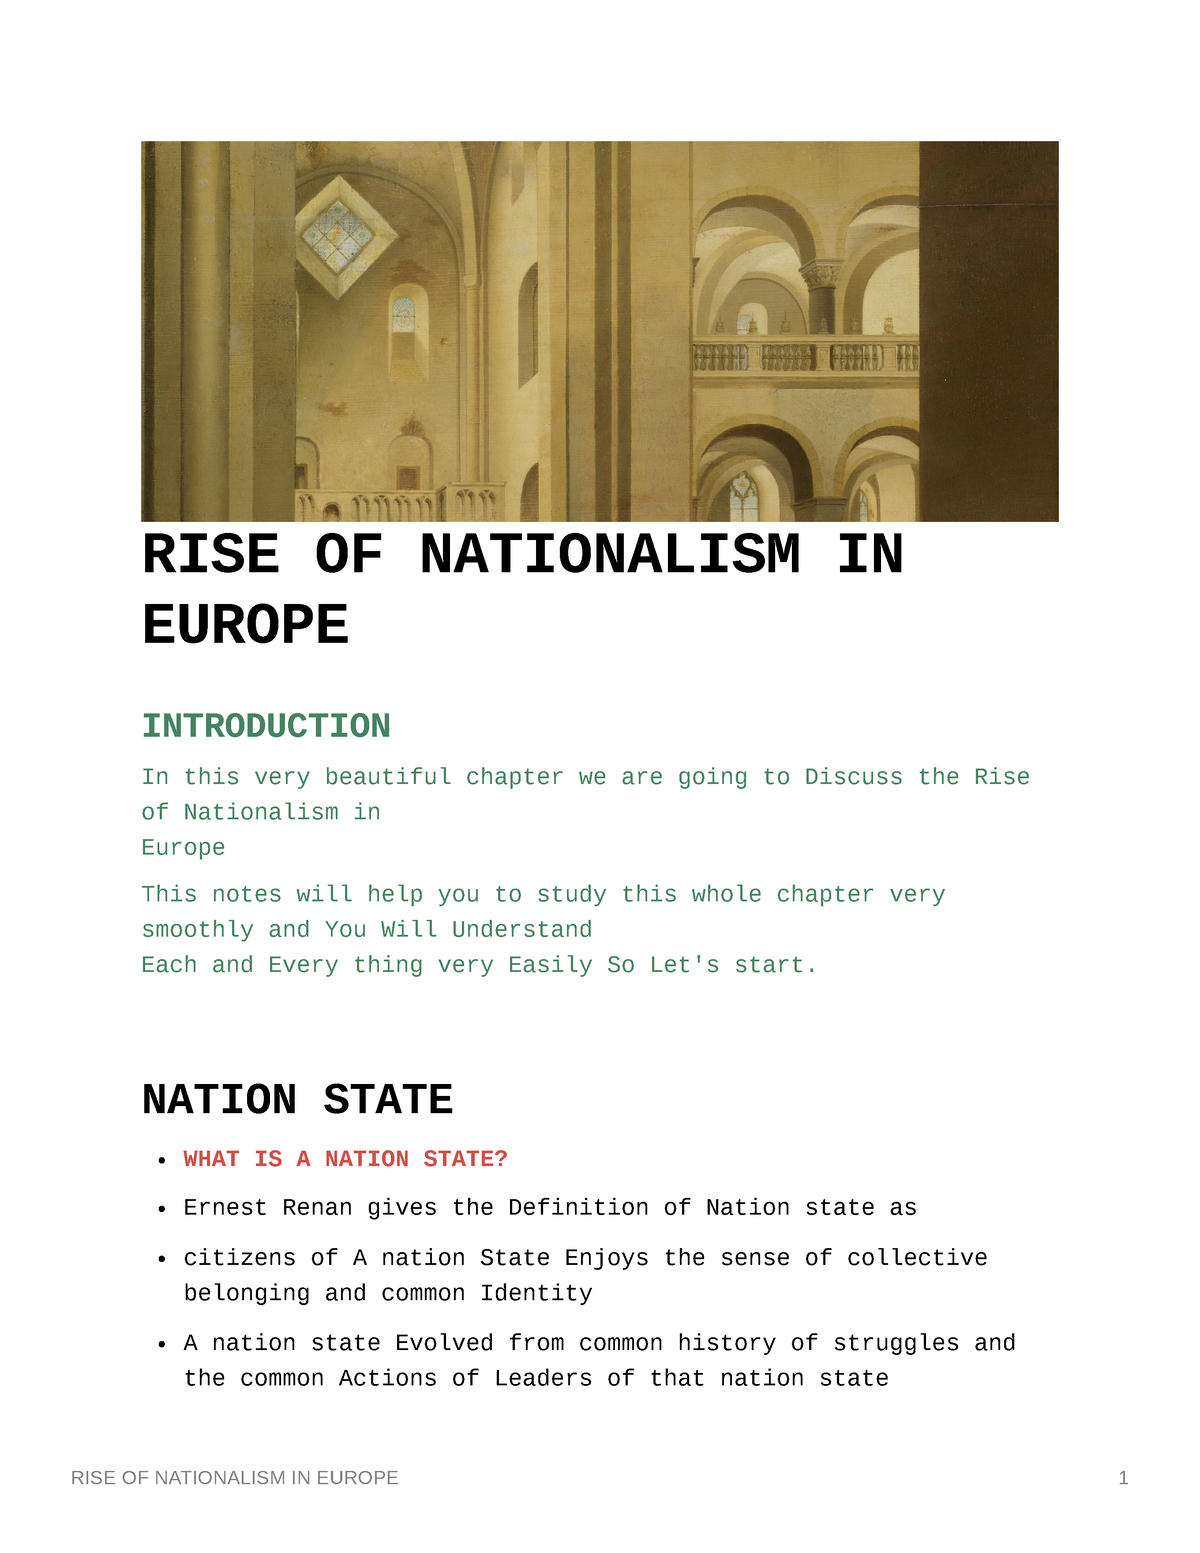 essay on nationalism in europe